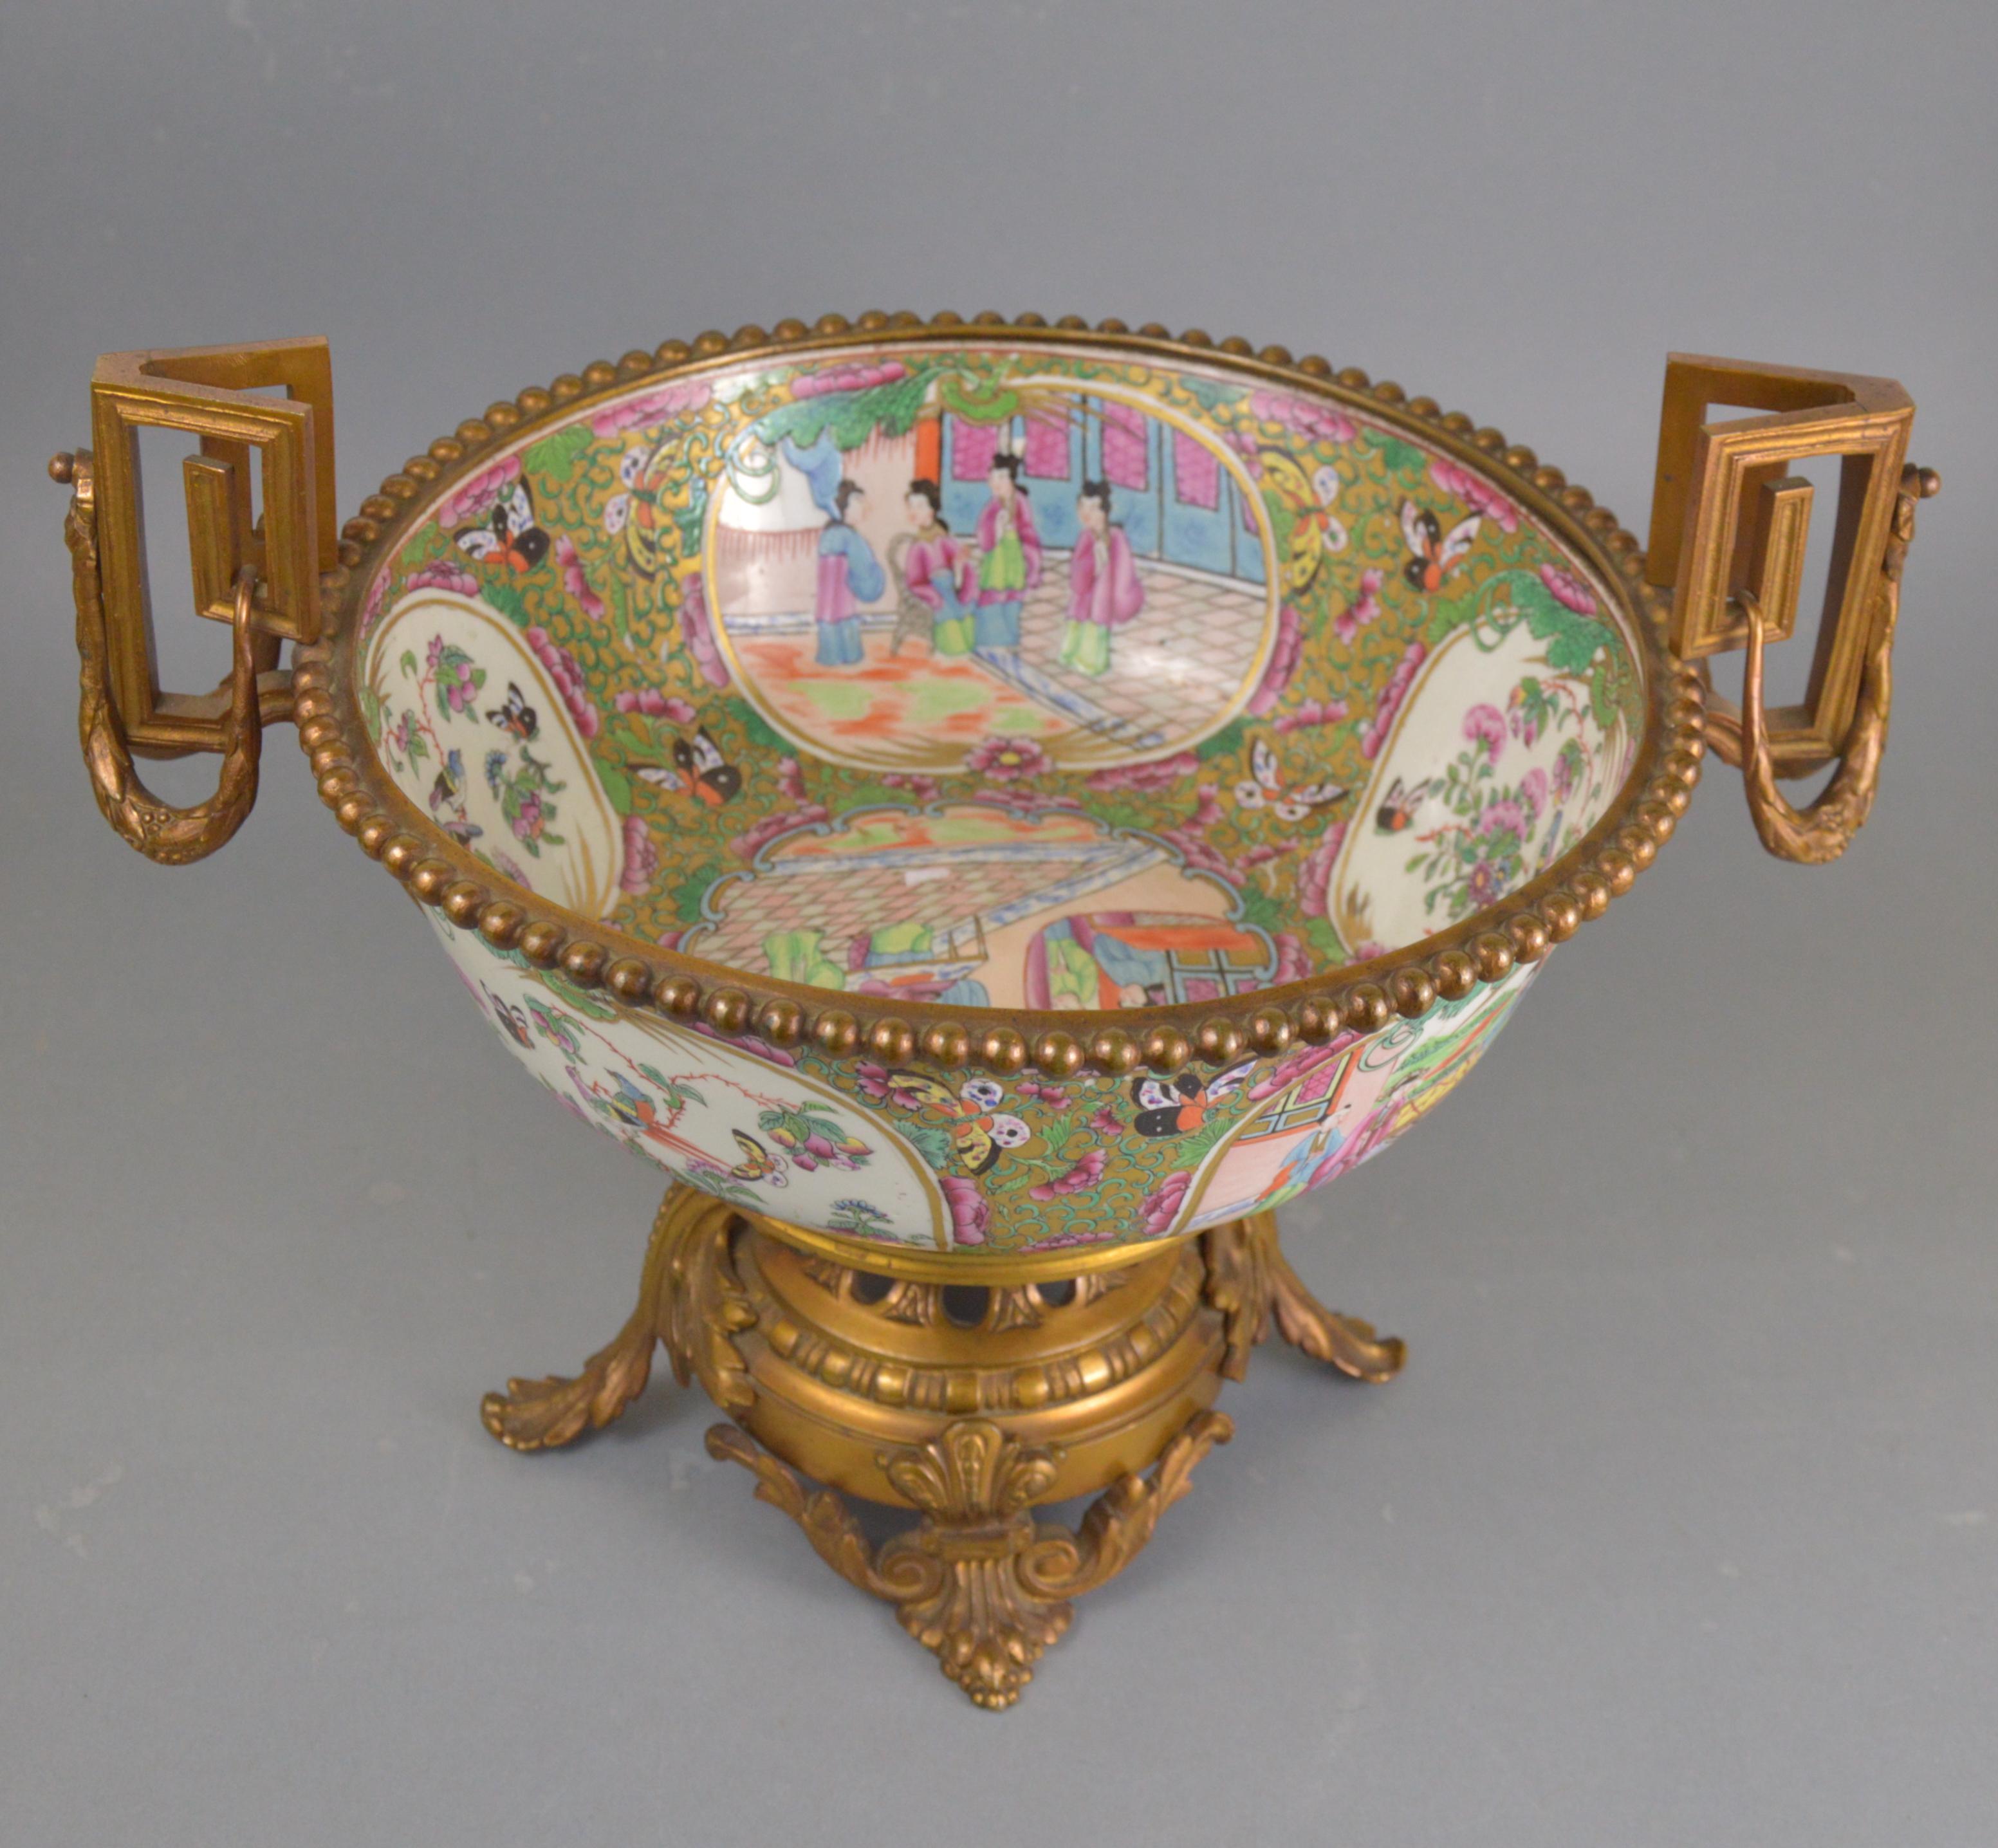 19th century. Chinese Gilt bronze mounted Canton polychrome enameled porcelain bowl. Fine quality medallion decoration of animated life scenes. Rose family.
Dimension: Ø (without handles) - 30 cm, height (with handles) - 28 cm.